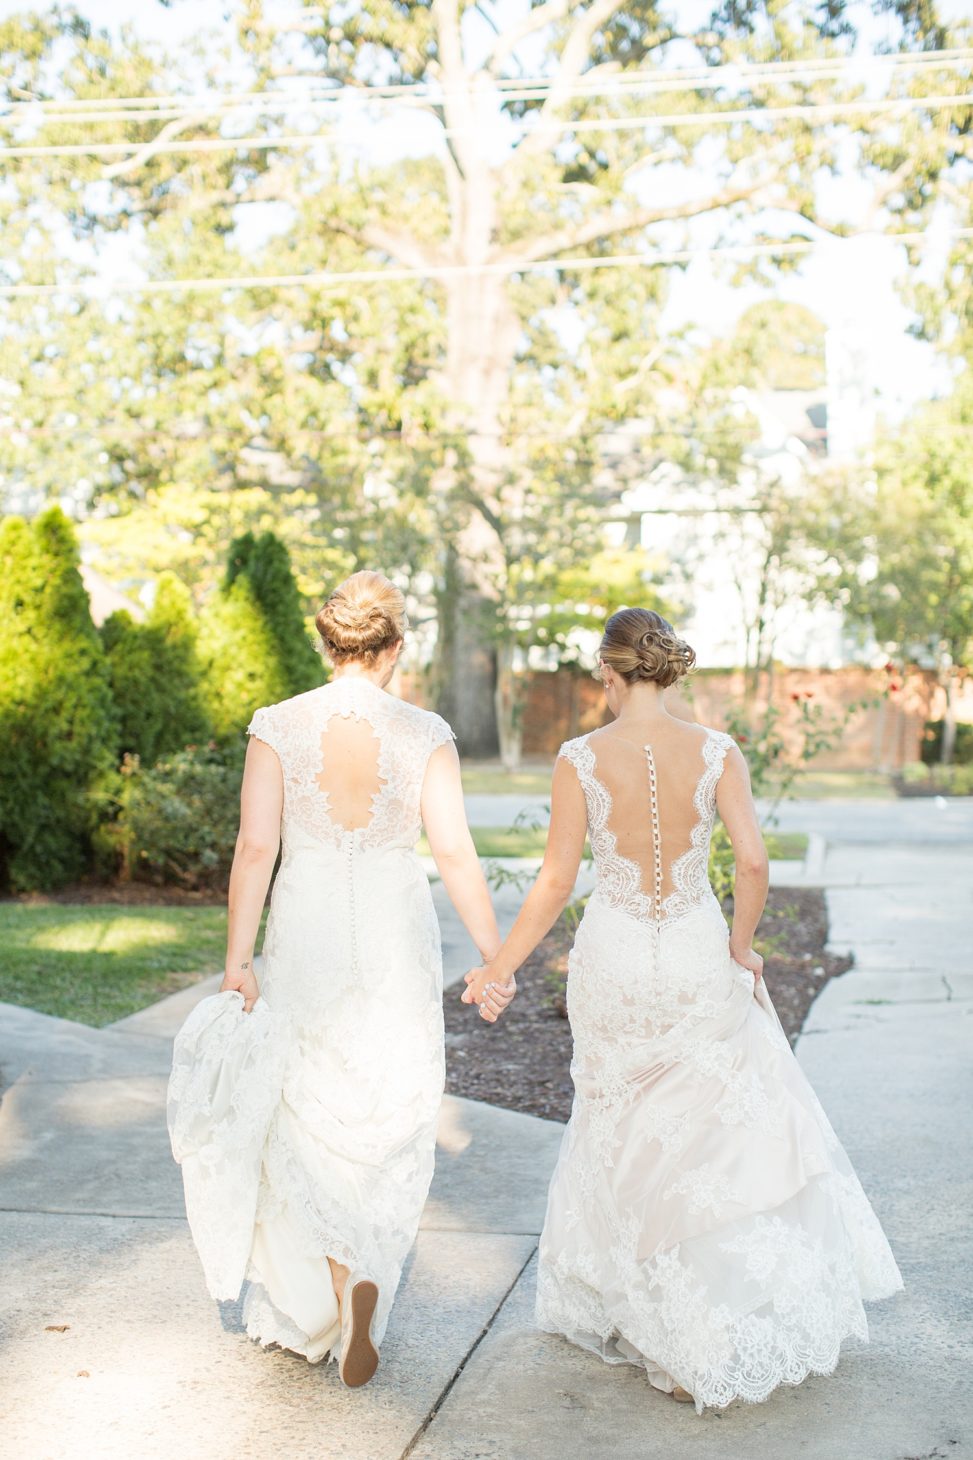 The second bride was rocking a sleeveless cap wedding dress with a cutout back